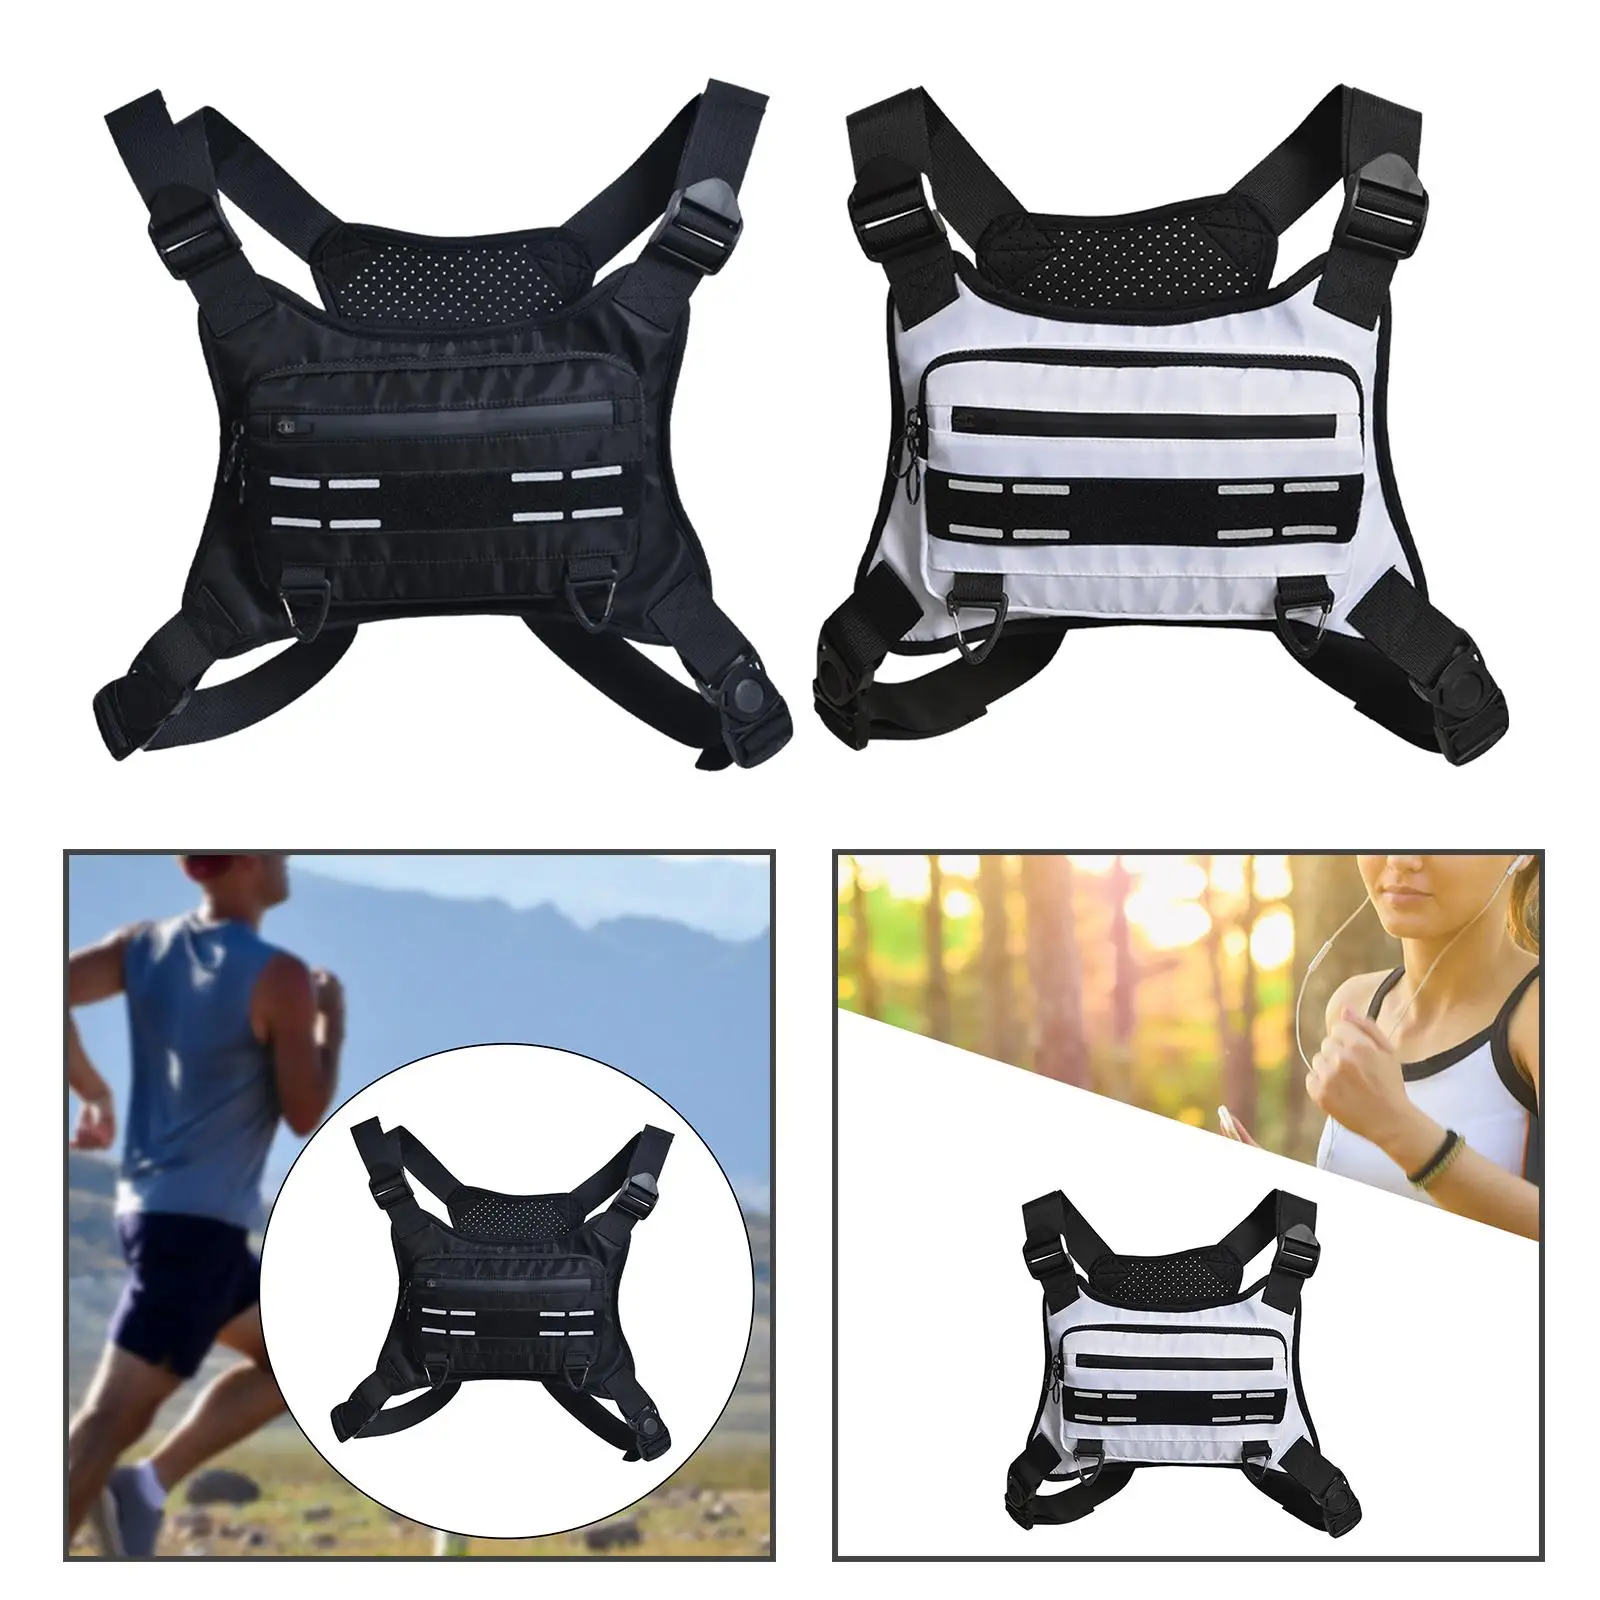 Chest Rig Bag Adult Portable Harness Vest Pouch for Camping Hiking Travel